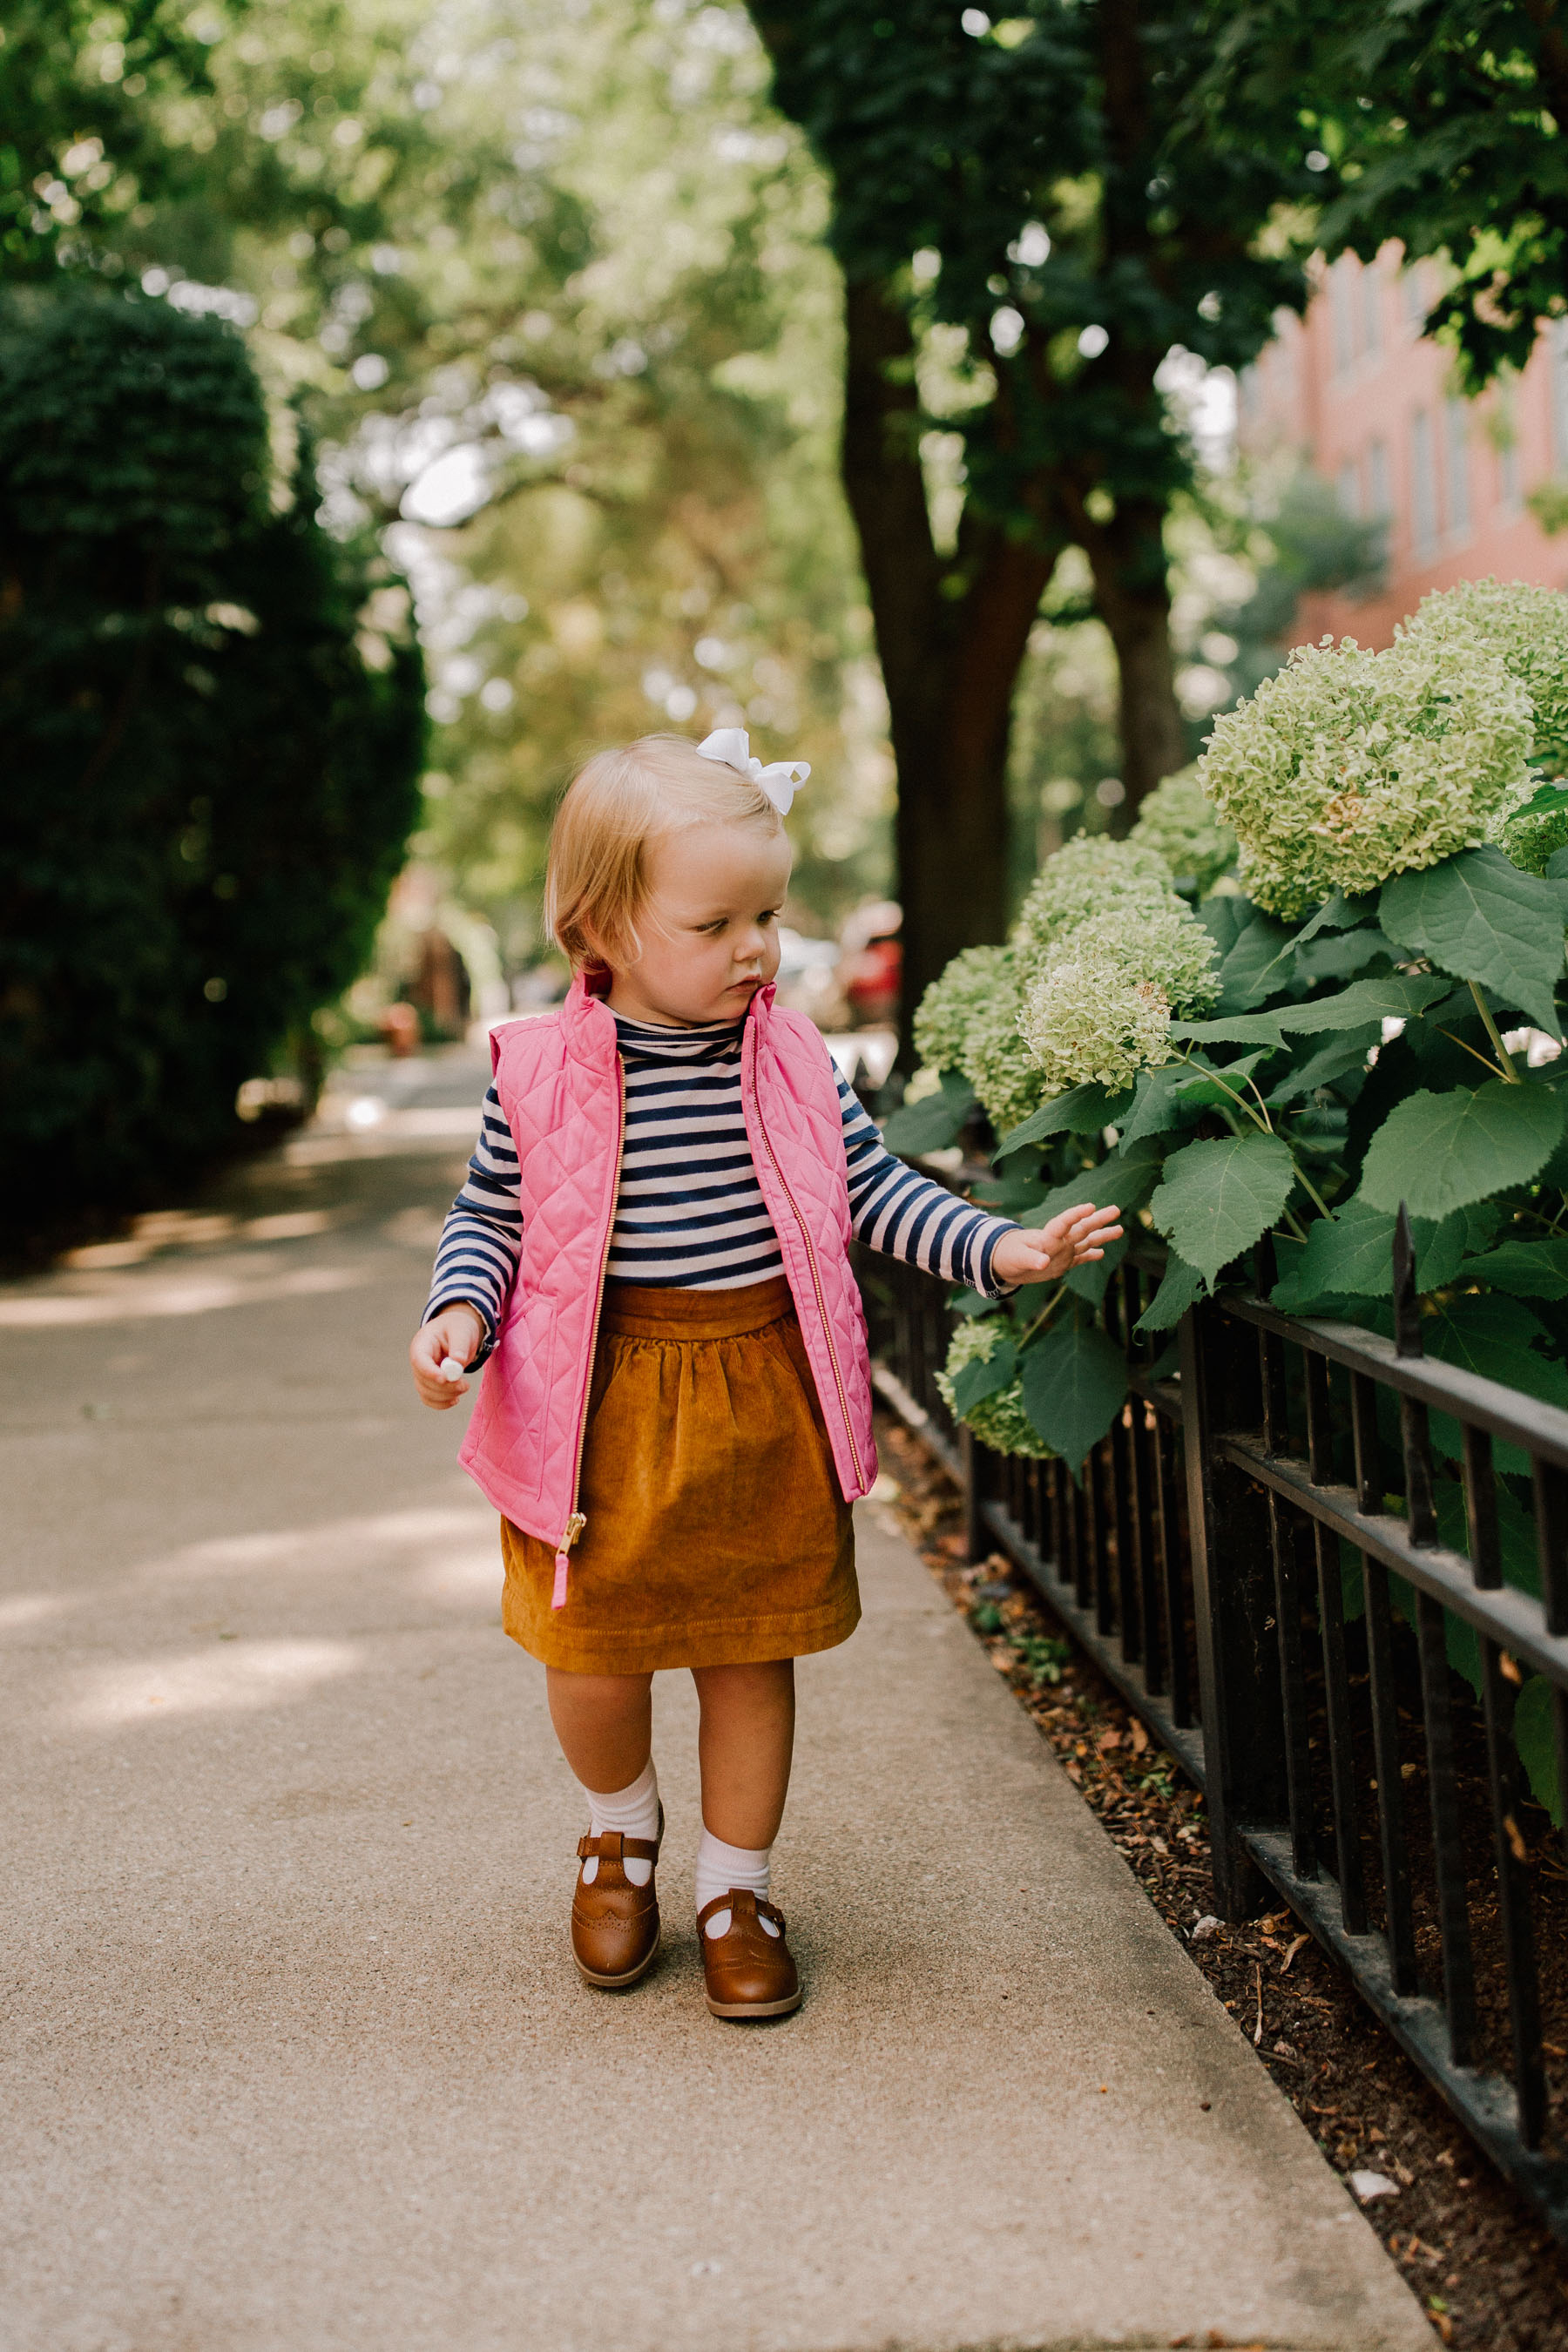  Emma's Corduroy Skirt, Quilted Vest and Similar Striped Top 